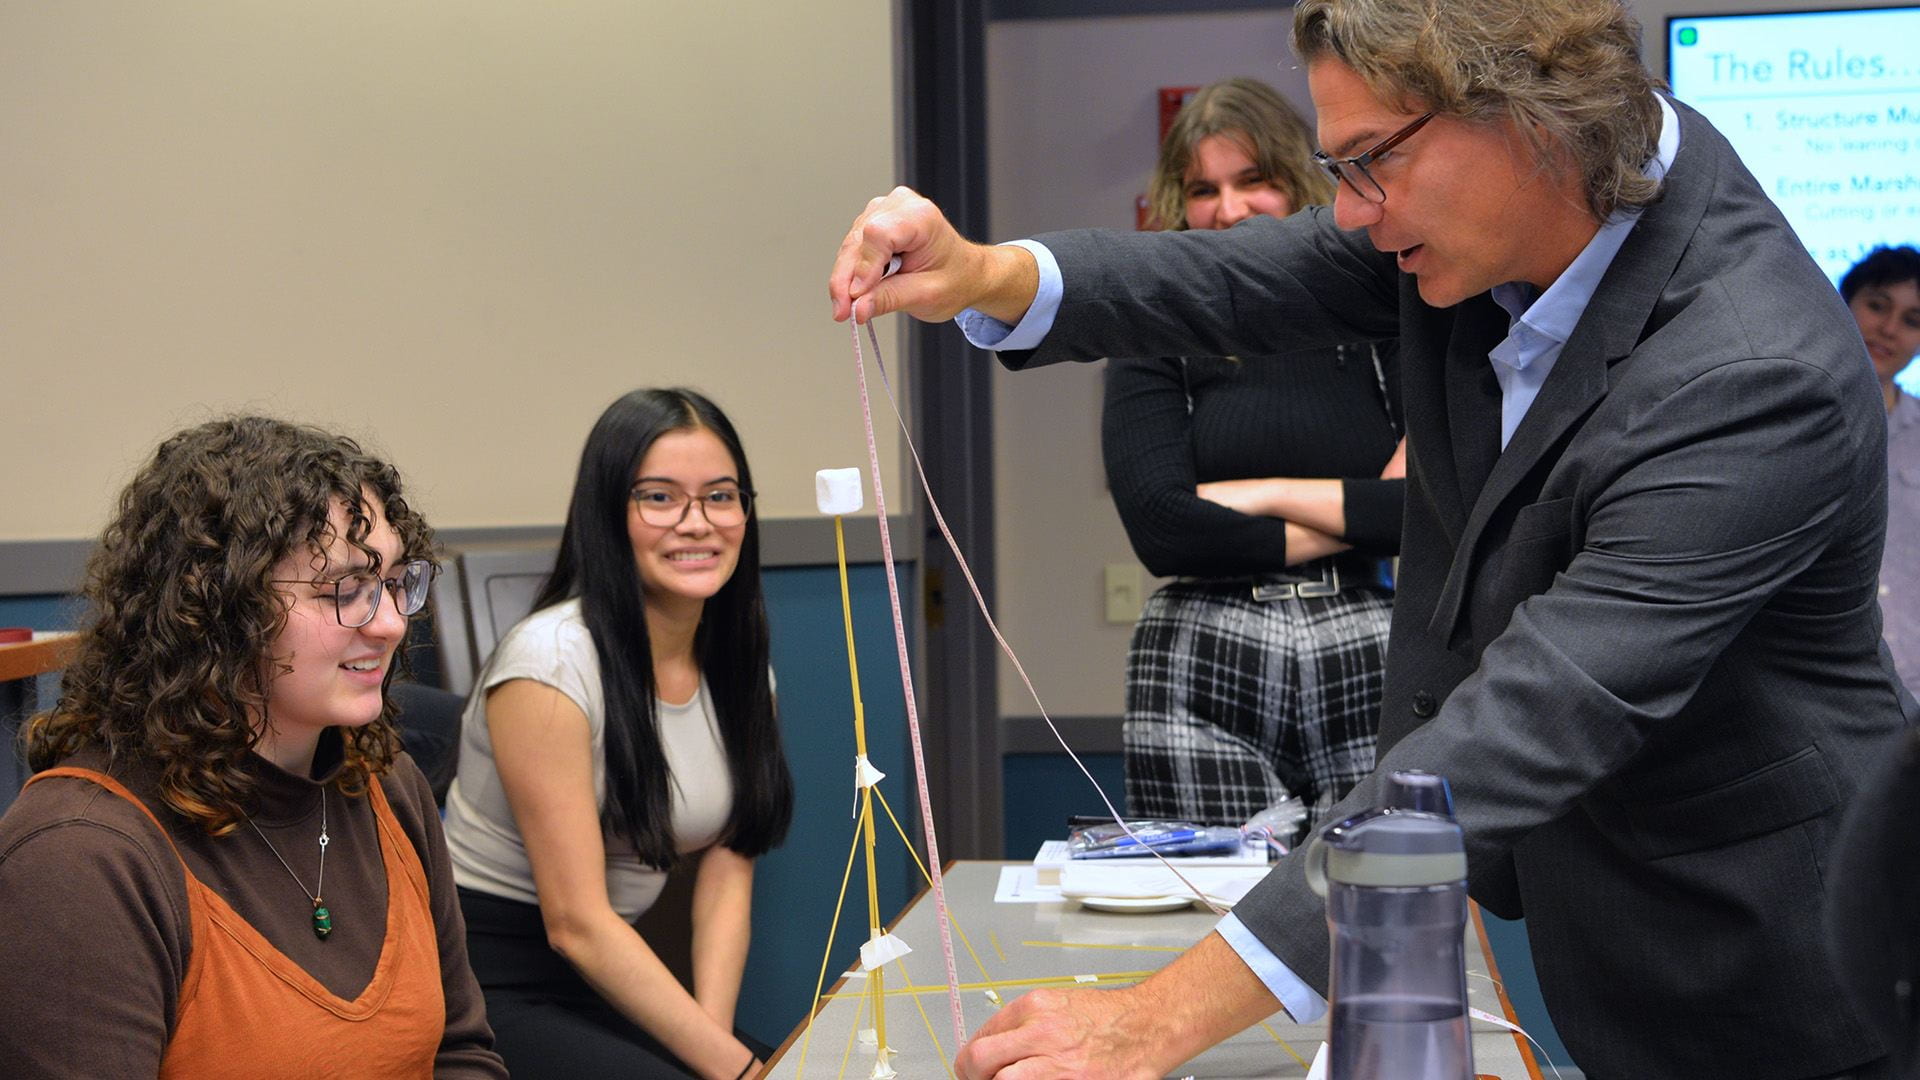 Students building marshmallow structure: Student teams competed to build the tallest spaghetti-and-marshmallow structure -- and learn how different kinds of leaders emerge from within teams in the process. 